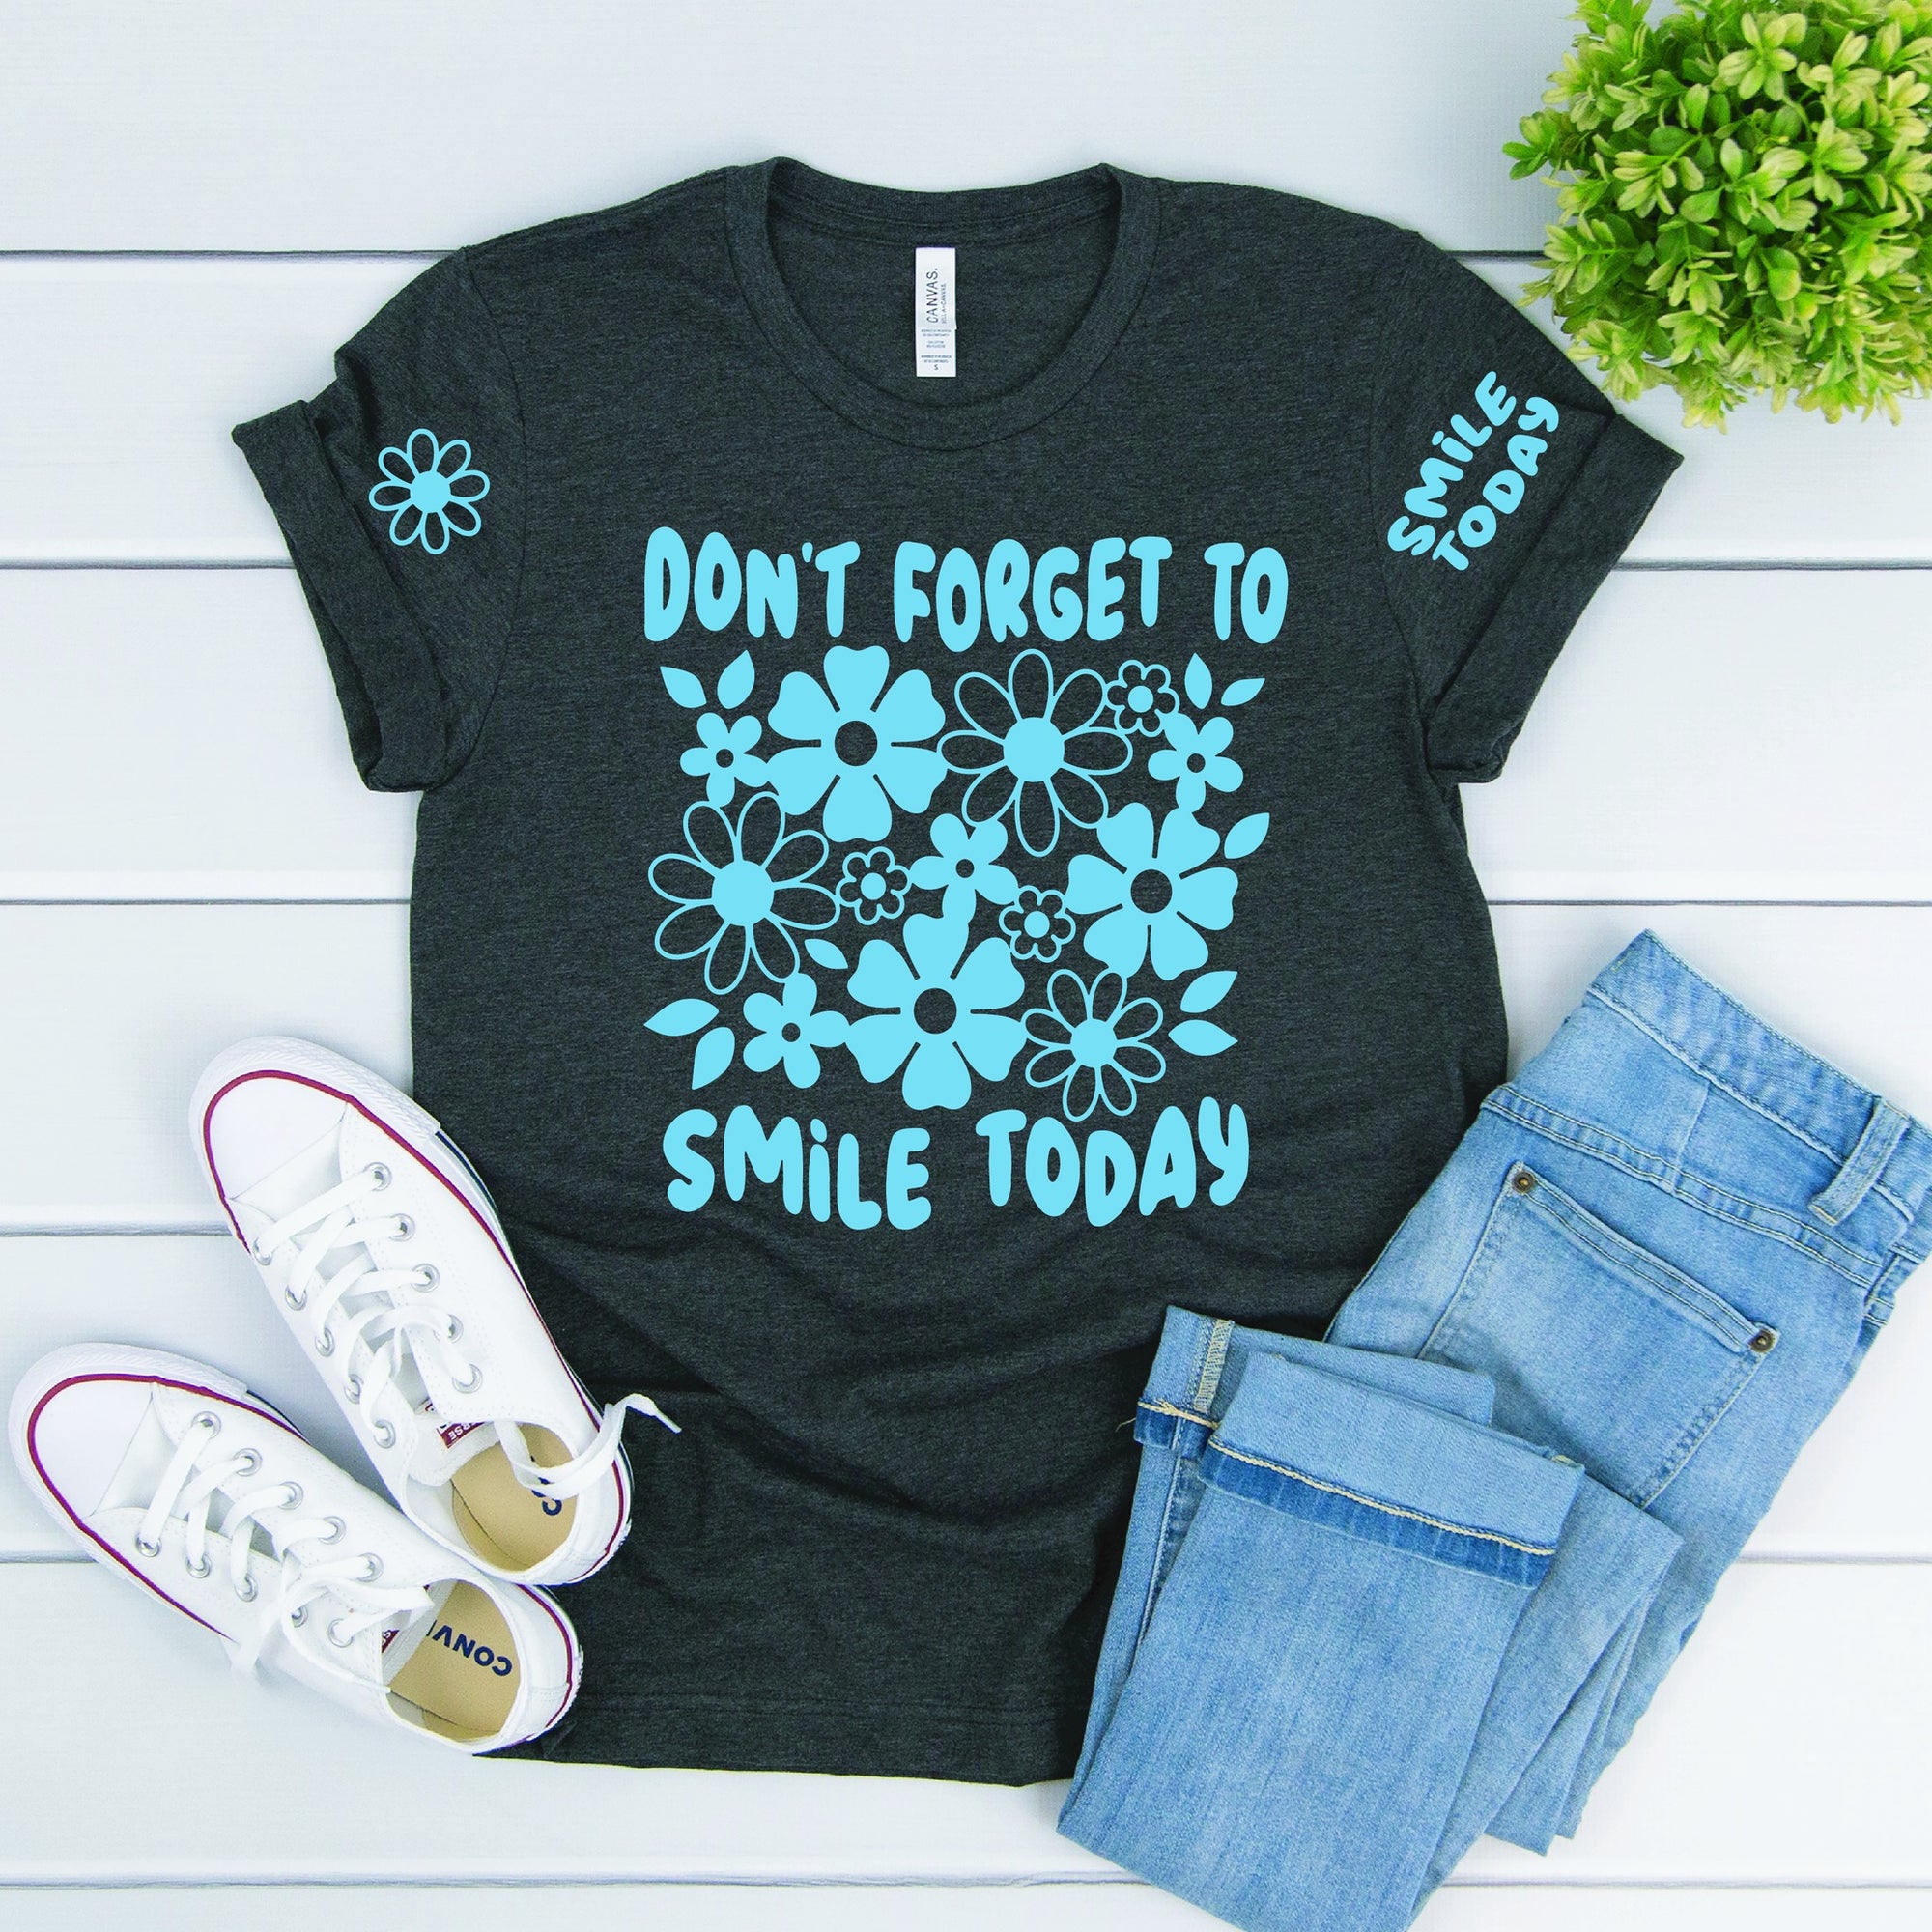 Smile Today With Sleeve Accents Graphic Tee